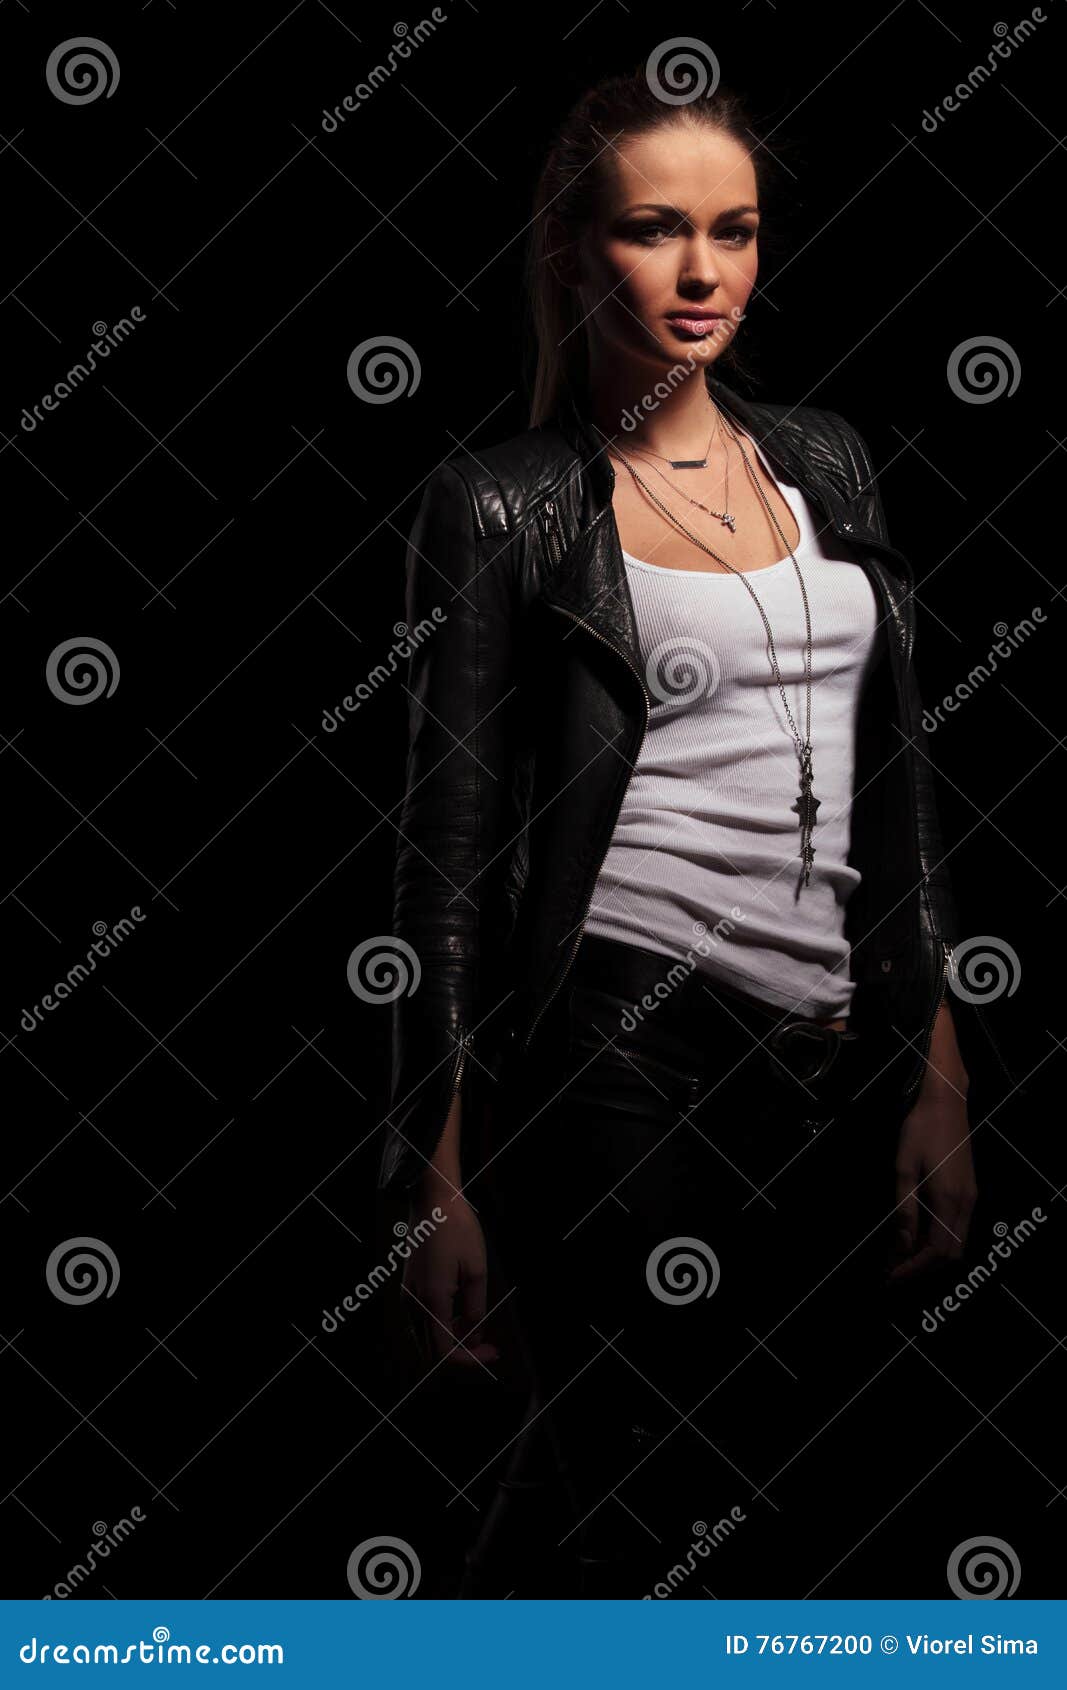 Woman in Leather Jacket and Undershirt Standing Stock Photo - Image of ...